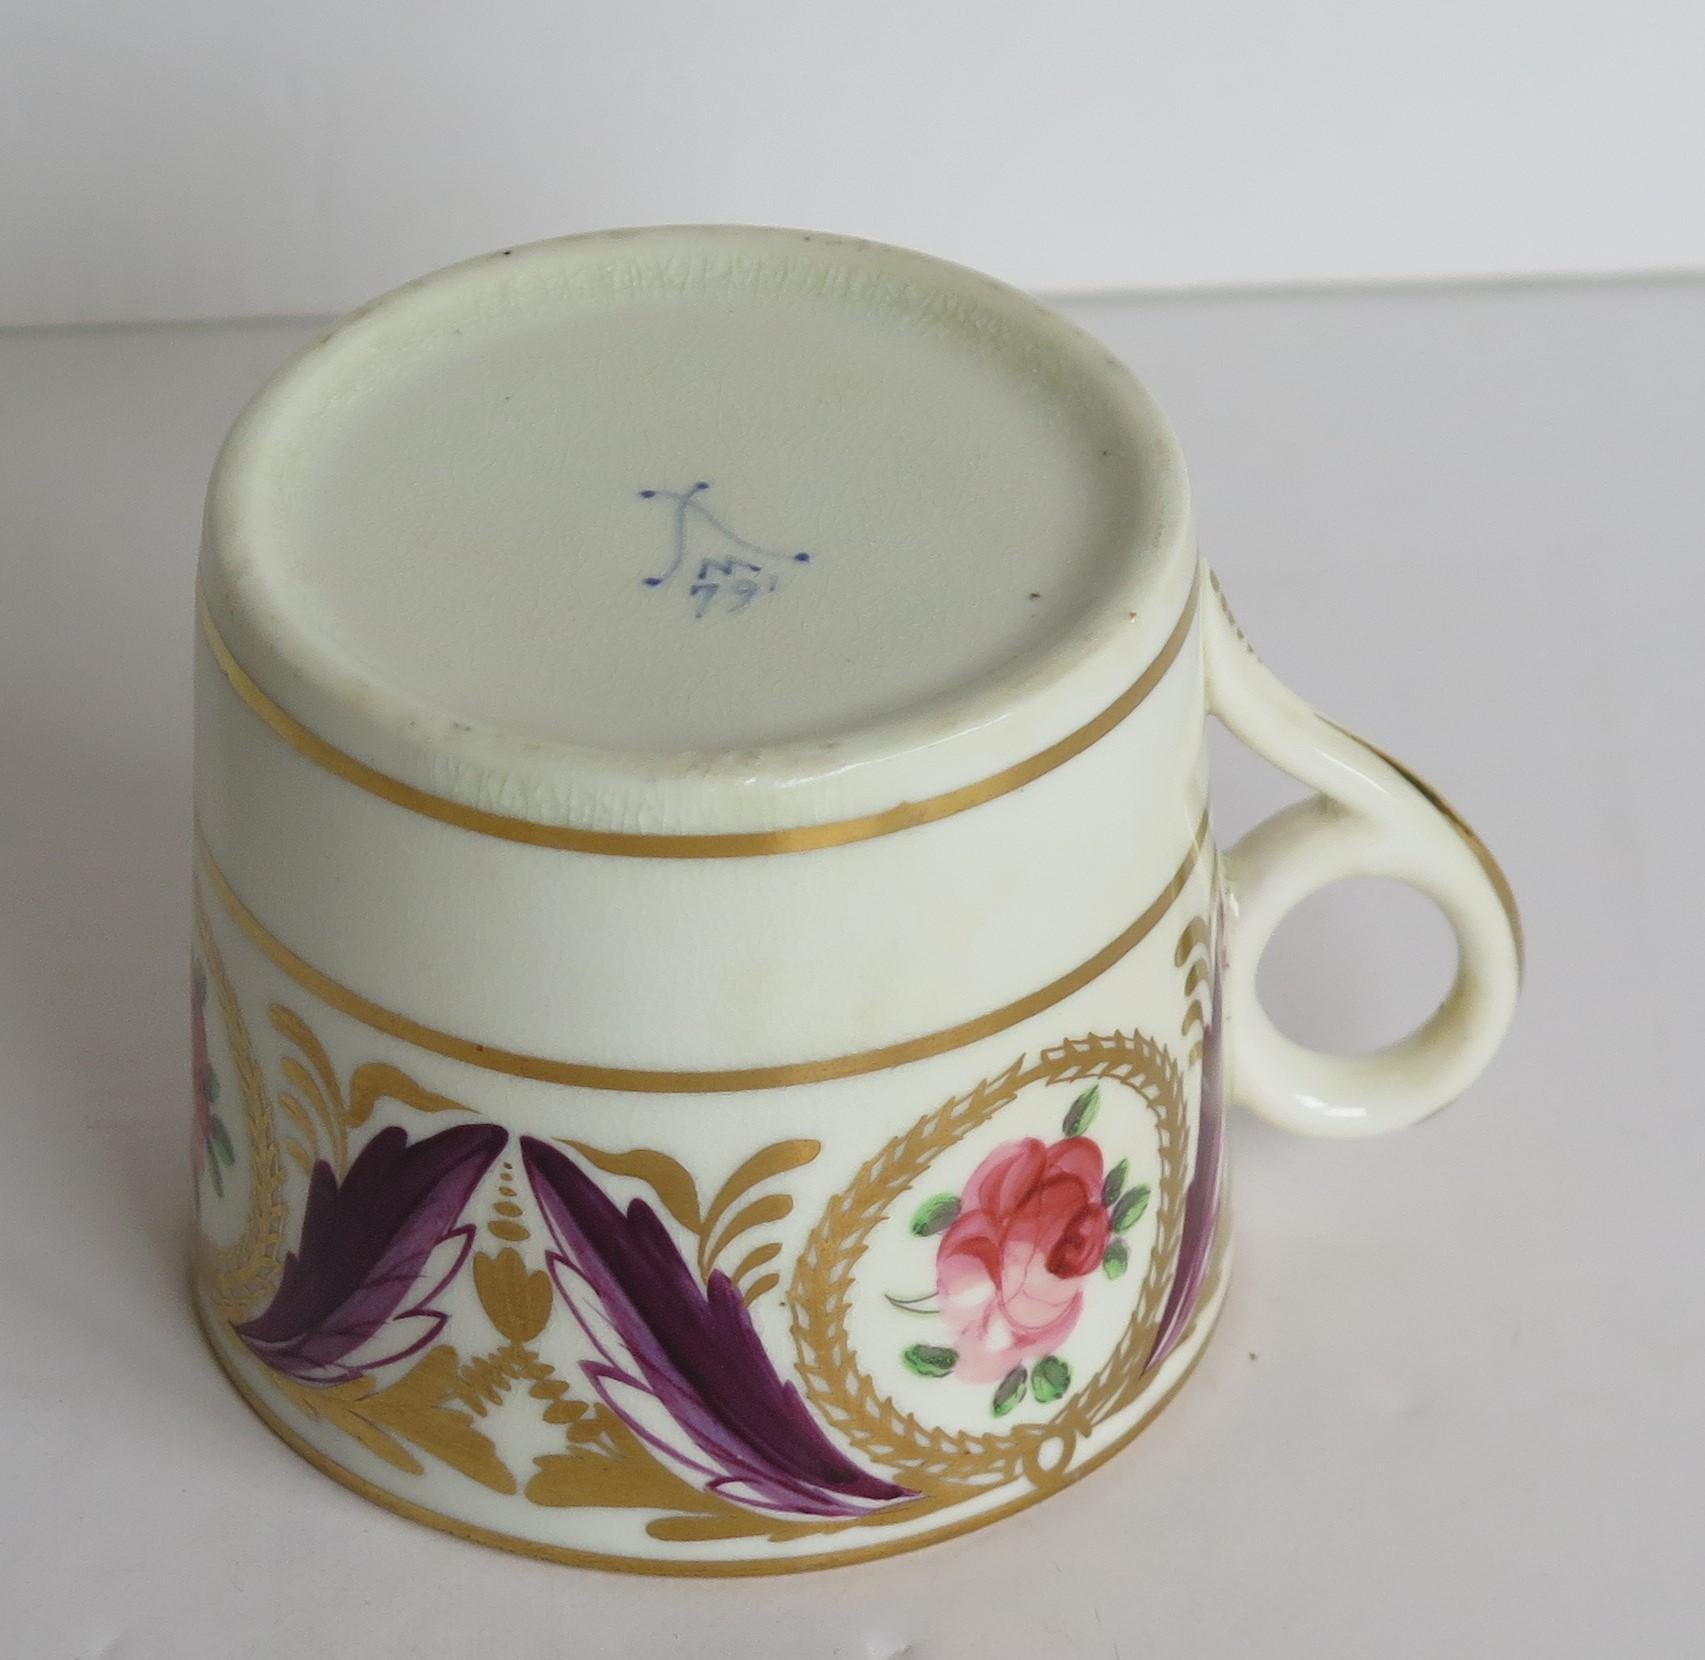 George 111 Minton Porcelain Coffee Can Hand Painted in Pattern 791, Ca 1805 For Sale 10